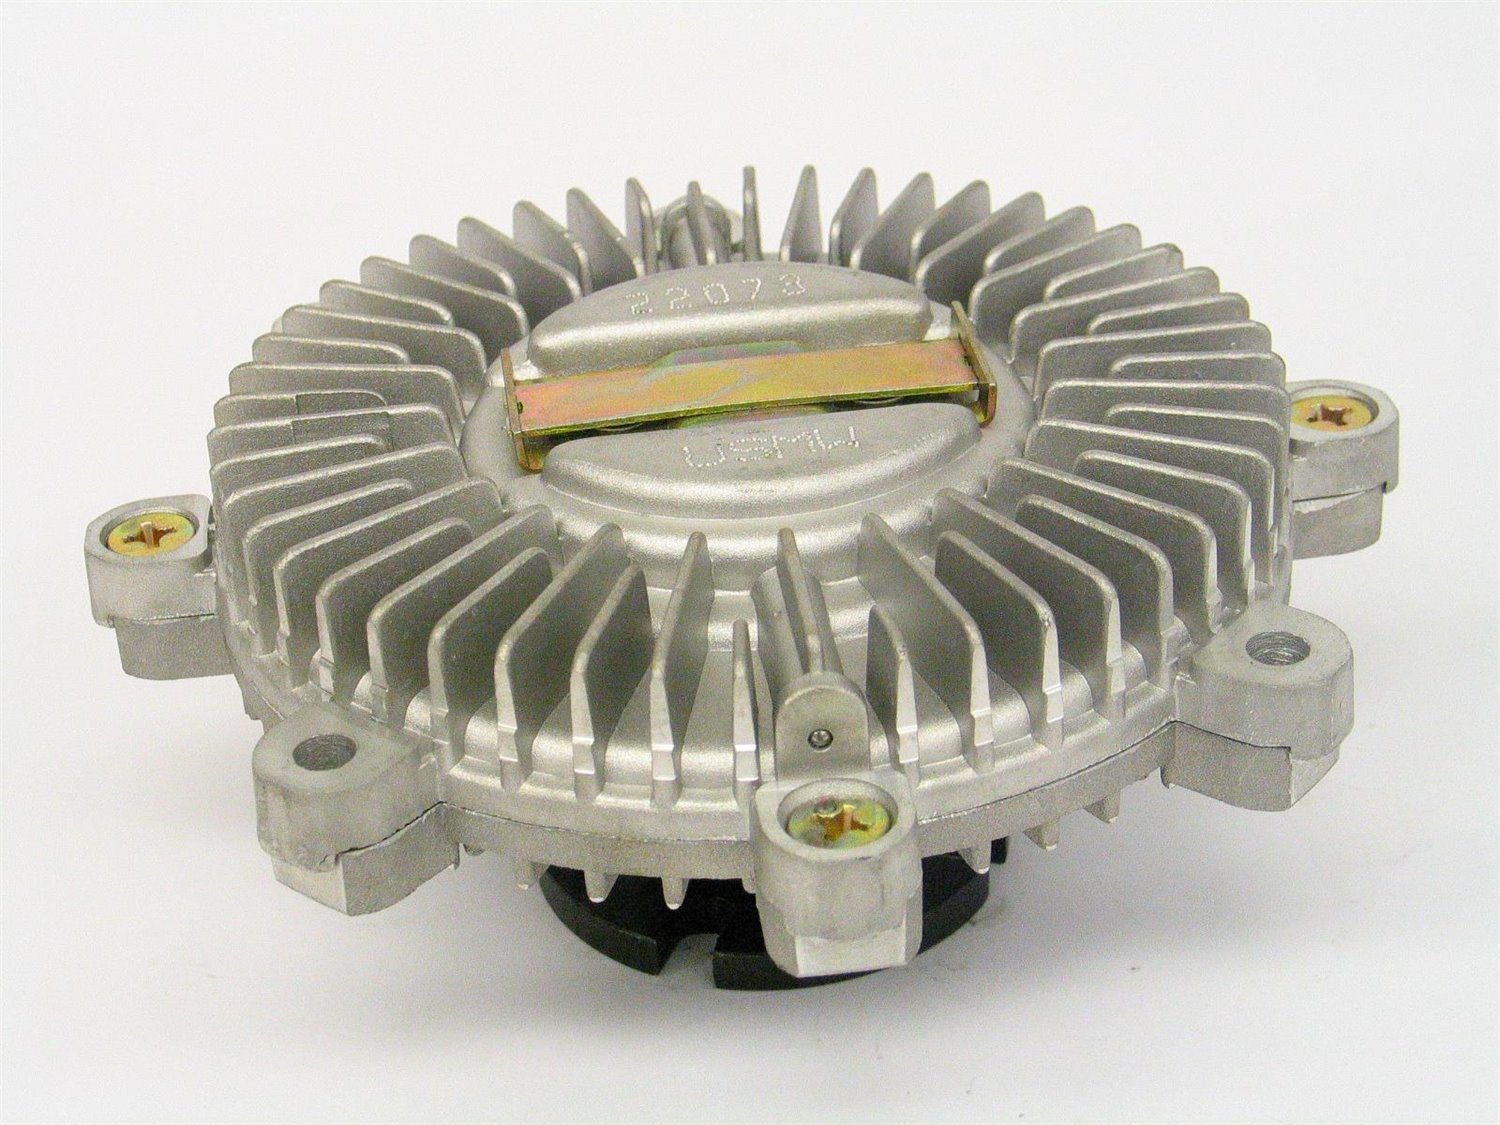 Heavy Duty Thermal Fan Clutch for 1983-1994 Dodge Ram 50/Mitsubishi Might Max 2.3L Diesel